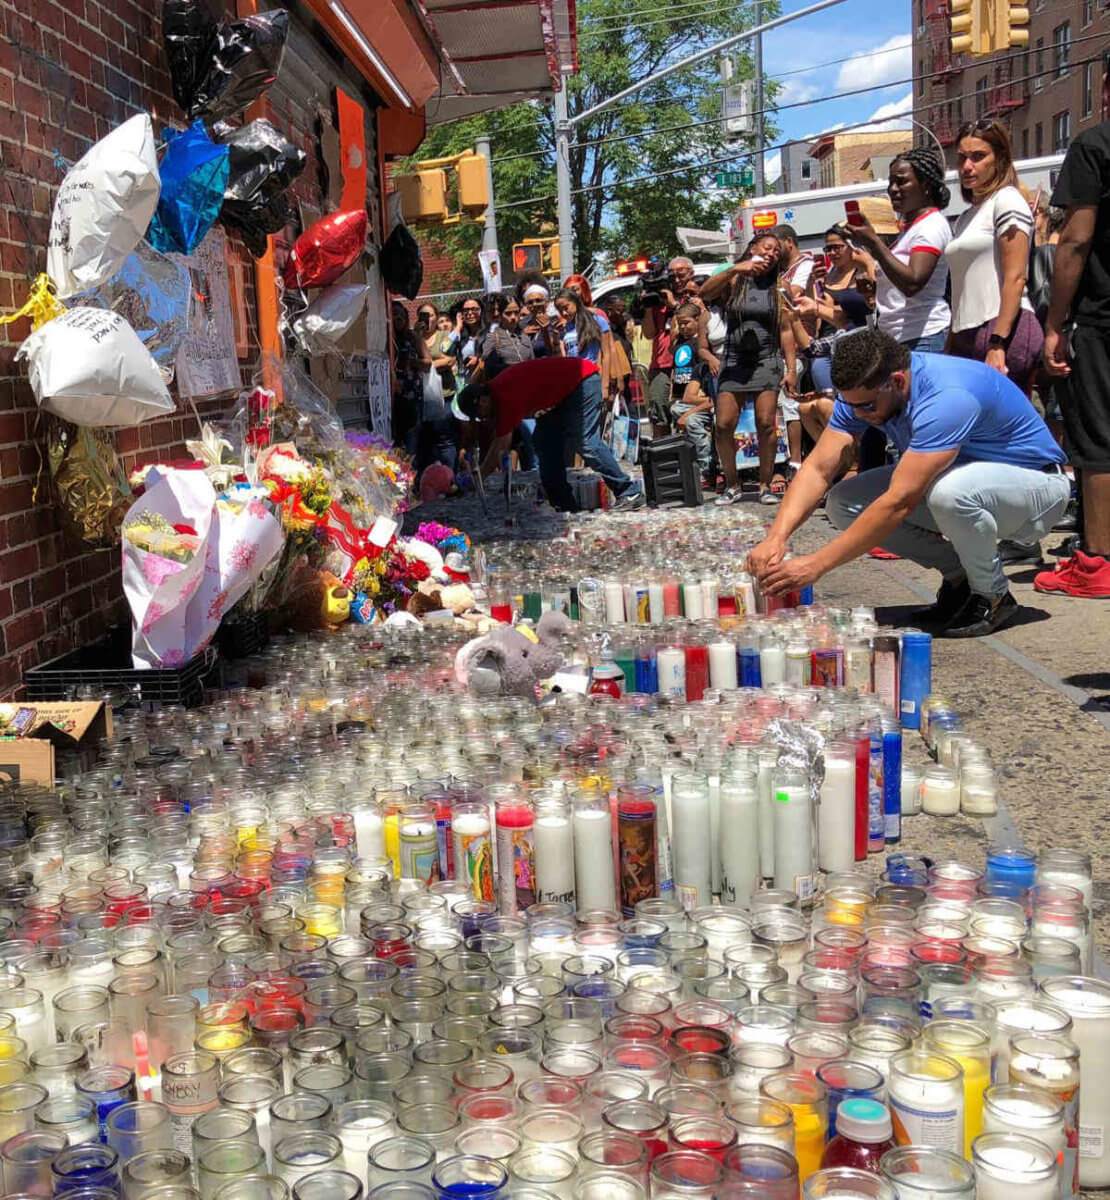 Justice for Junior: The Bronx mourns|Justice for Junior: The Bronx mourns|Justice for Junior: The Bronx mourns|Justice for Junior: The Bronx mourns